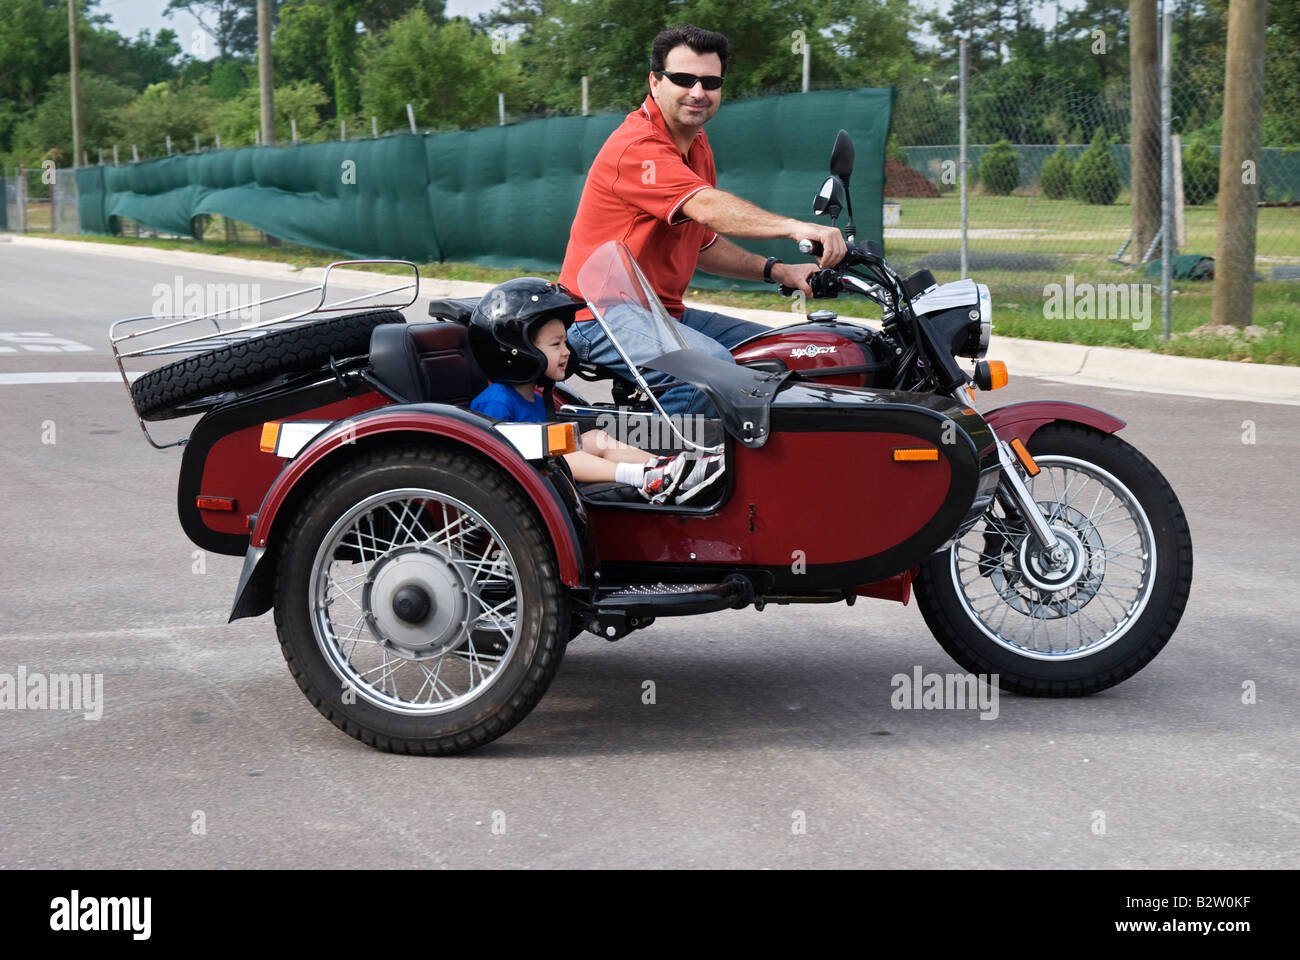 man on motorcycle with child in sidecar Gainesville Florida URAL YPAN motorcycle from Russia Stock Photo